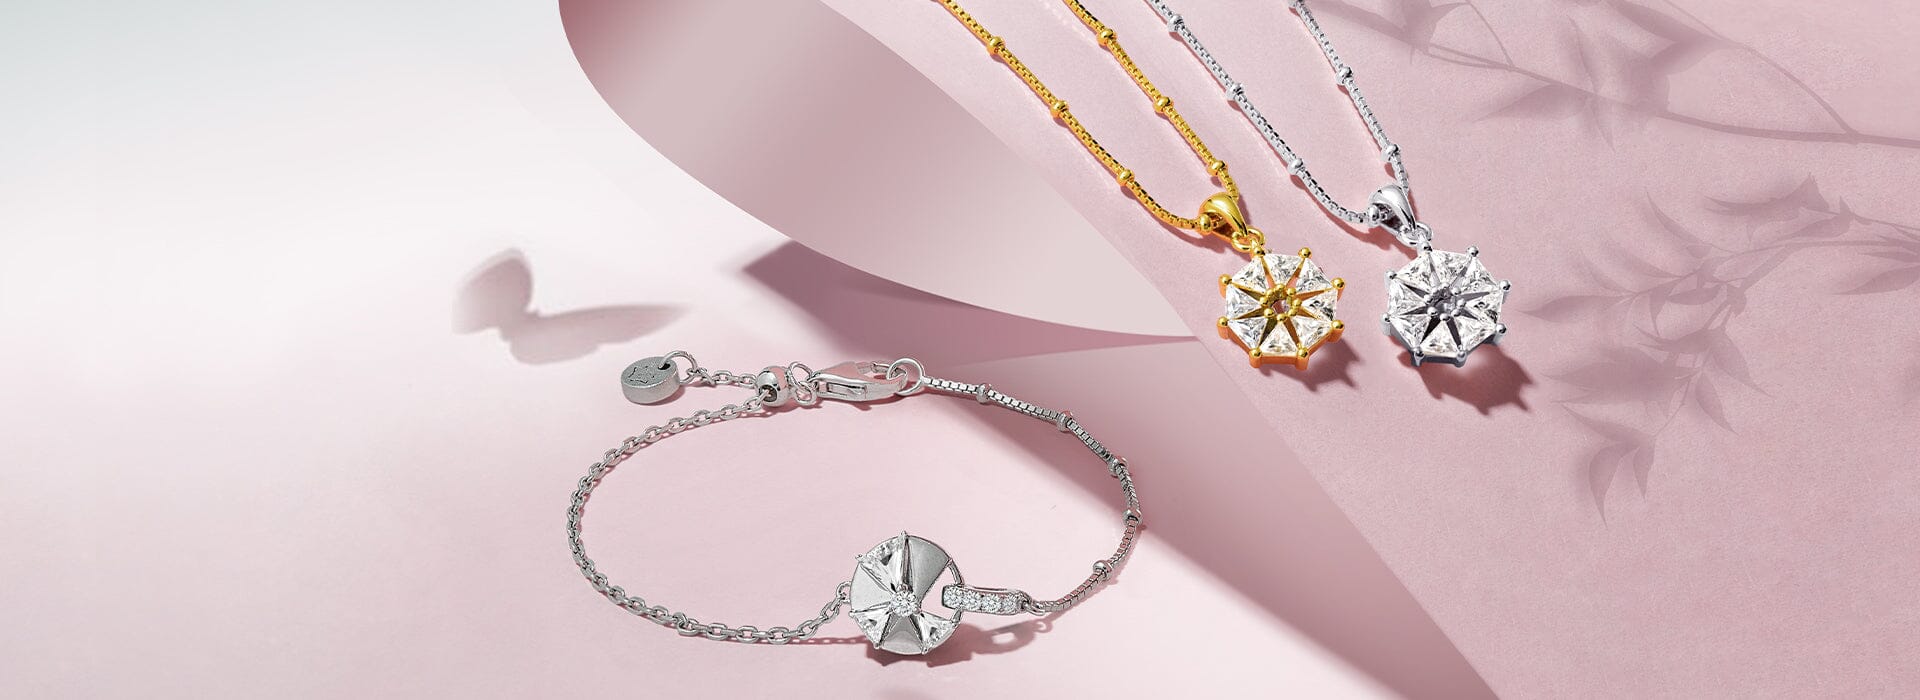 Handpicked Jewelry Bundles: Alluring Sets with 30% Off